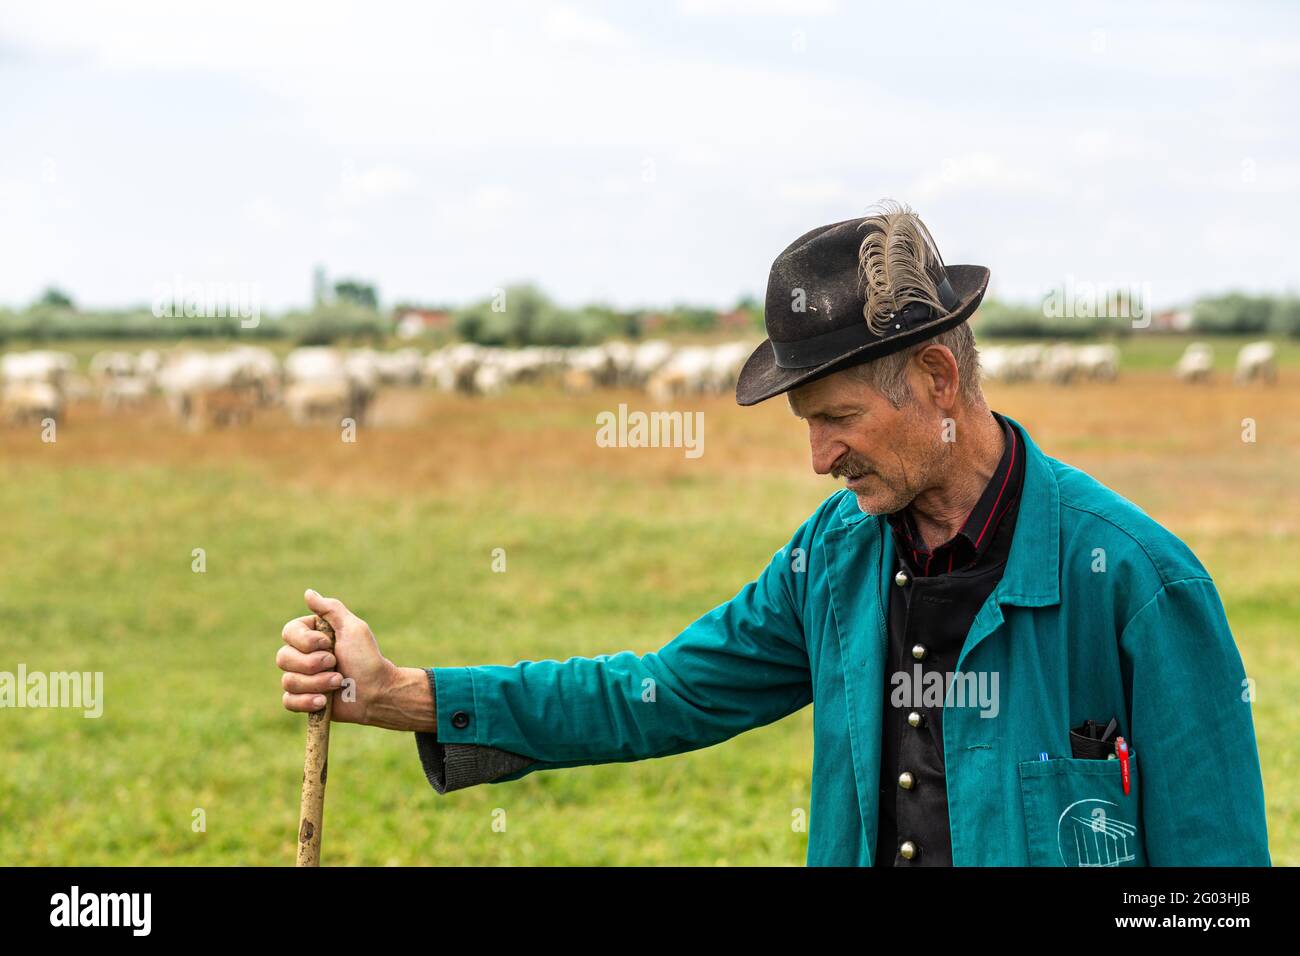 Portrait of a traditional grey cattle herding shepherd from rural Hungary Stock Photo